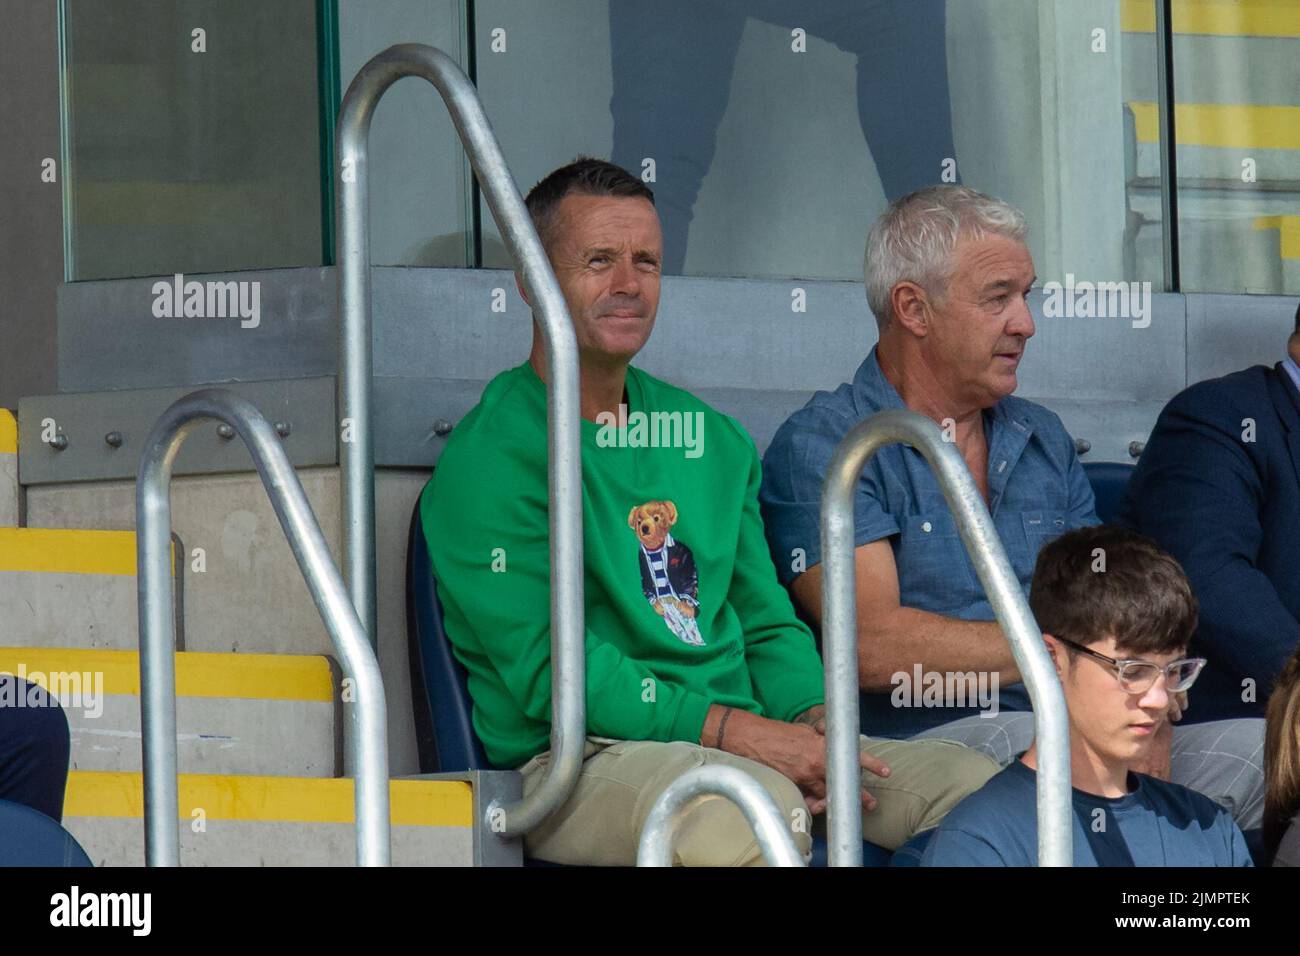 Leeds, UK. 07th Aug, 2022. Irish former footballer Gary Kelly in attendance for today's game between Leeds Rhinos and Salford Red Devils in Leeds, United Kingdom on 8/7/2022. (Photo by James Heaton/News Images/Sipa USA) Credit: Sipa USA/Alamy Live News Stock Photo